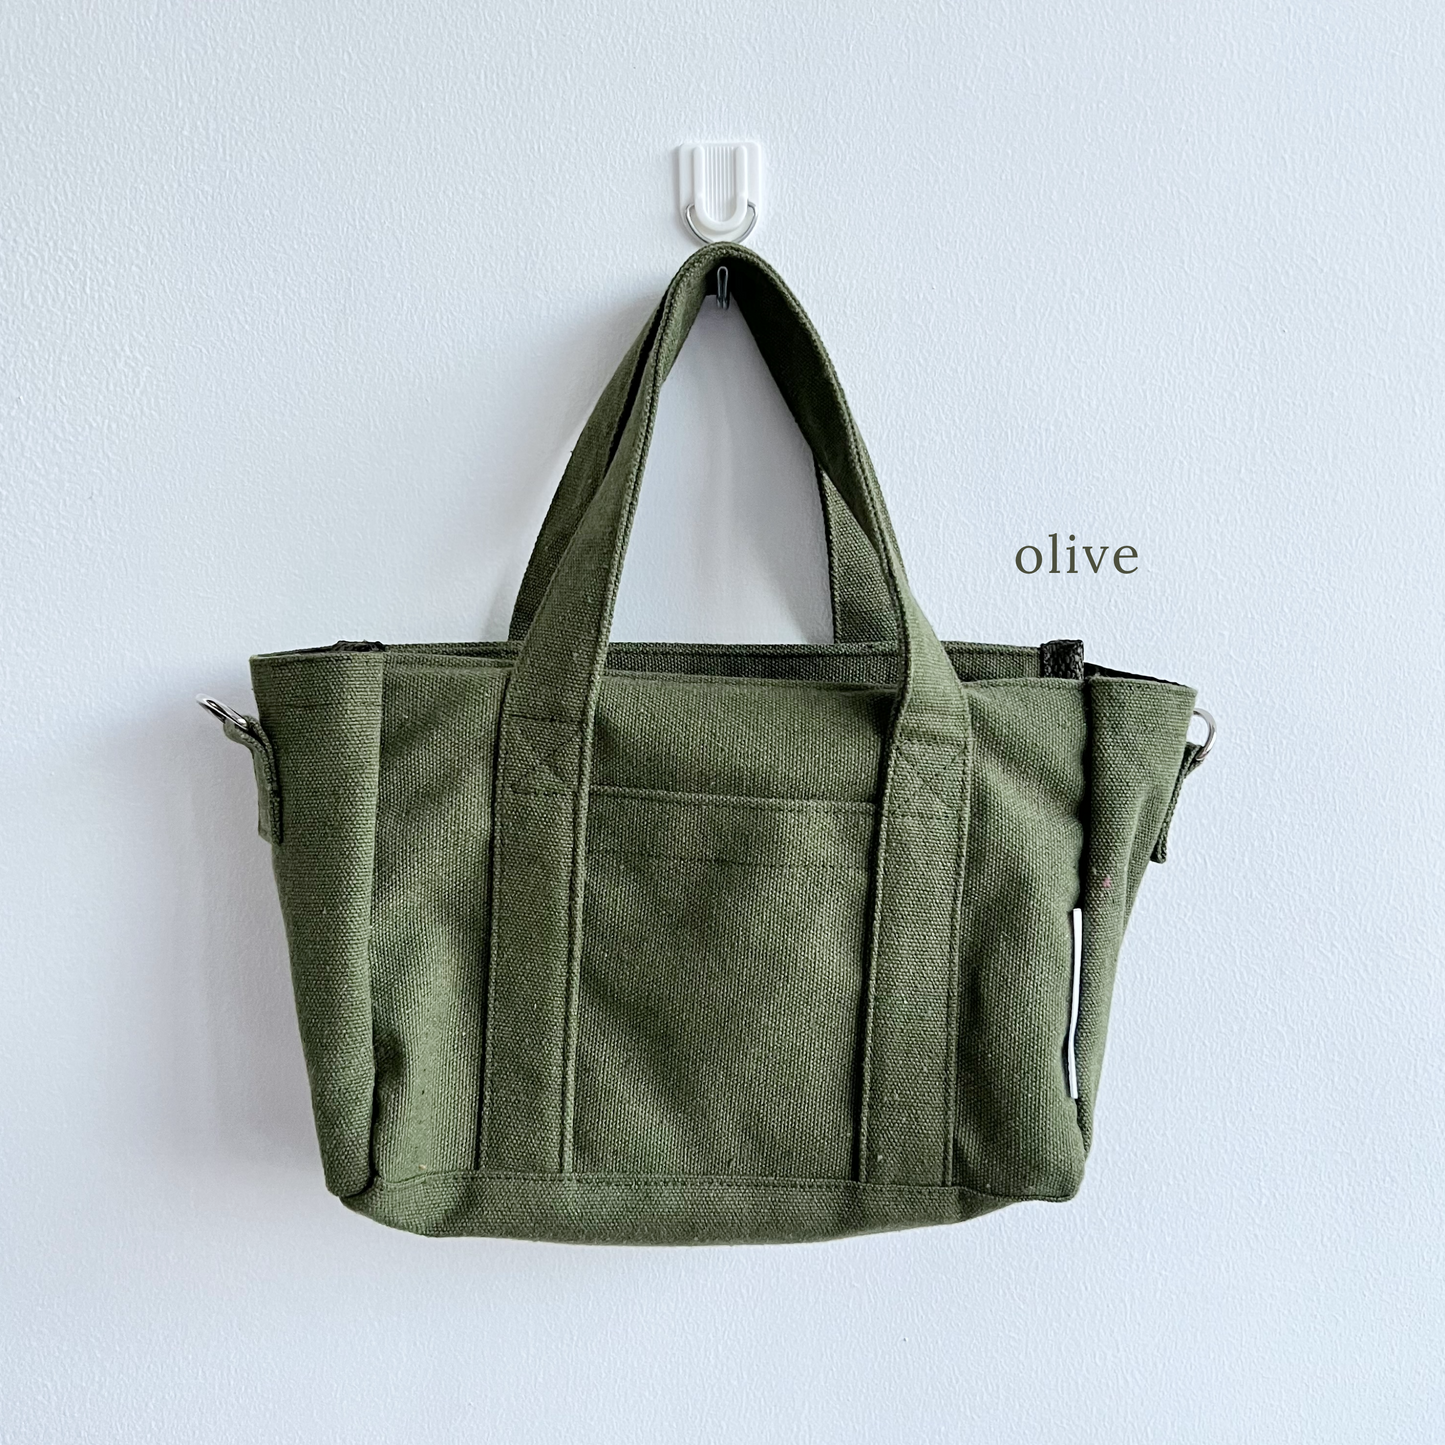 The City Tote